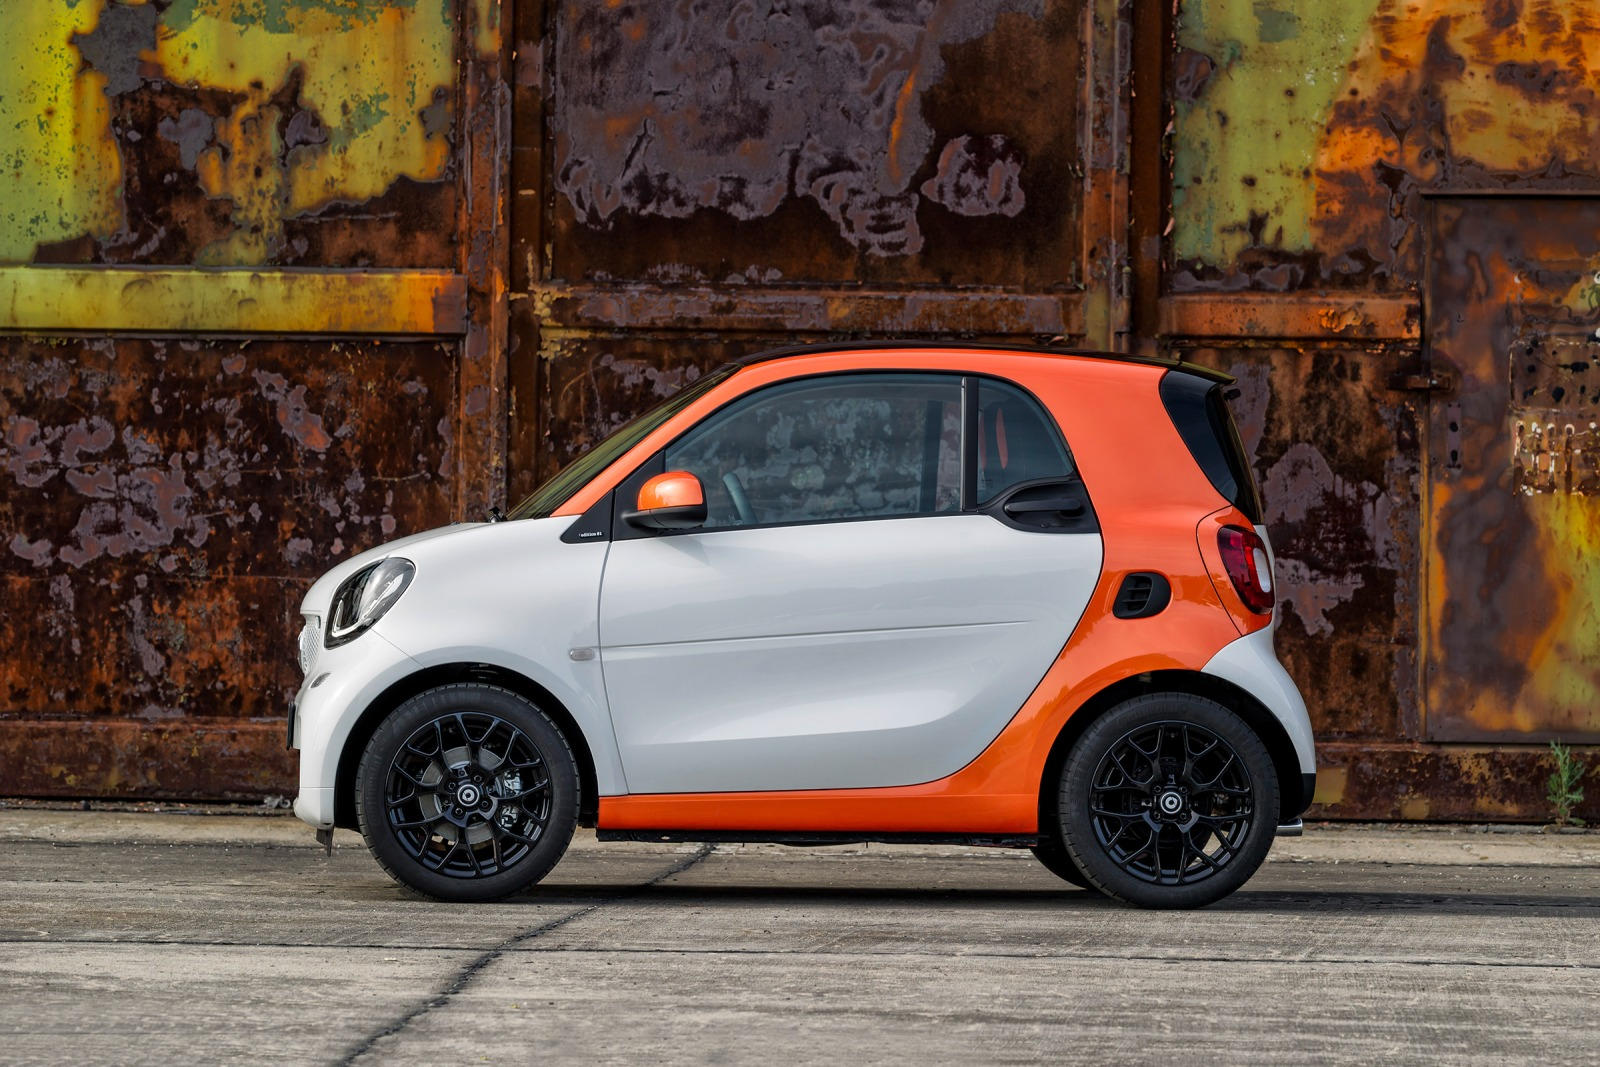 2017 smart fortwo Review Trims Specs Price New Interior Features 